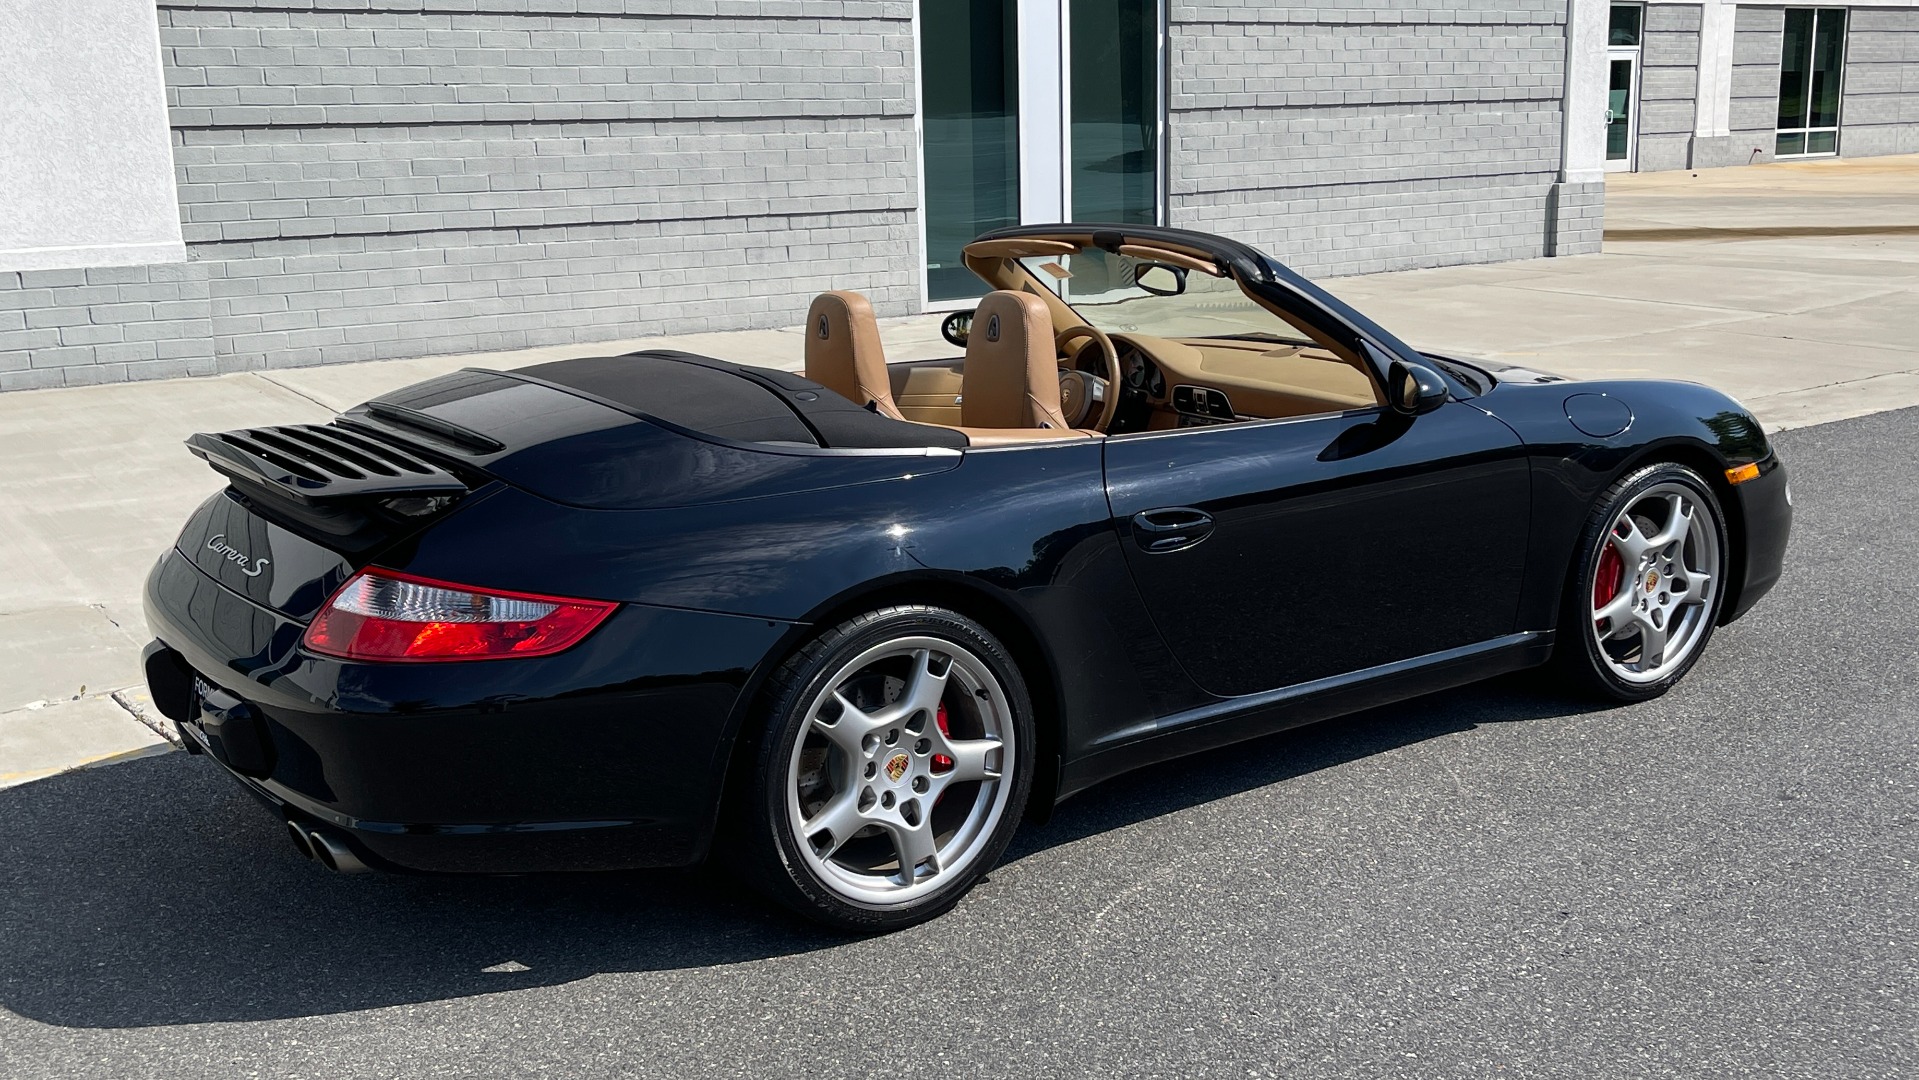 Used 2006 Porsche 911 CARRERA S CABRIOLET / BOSE / CD CHANGER / PWR SEAT PKG / HTD STS for sale $60,999 at Formula Imports in Charlotte NC 28227 5